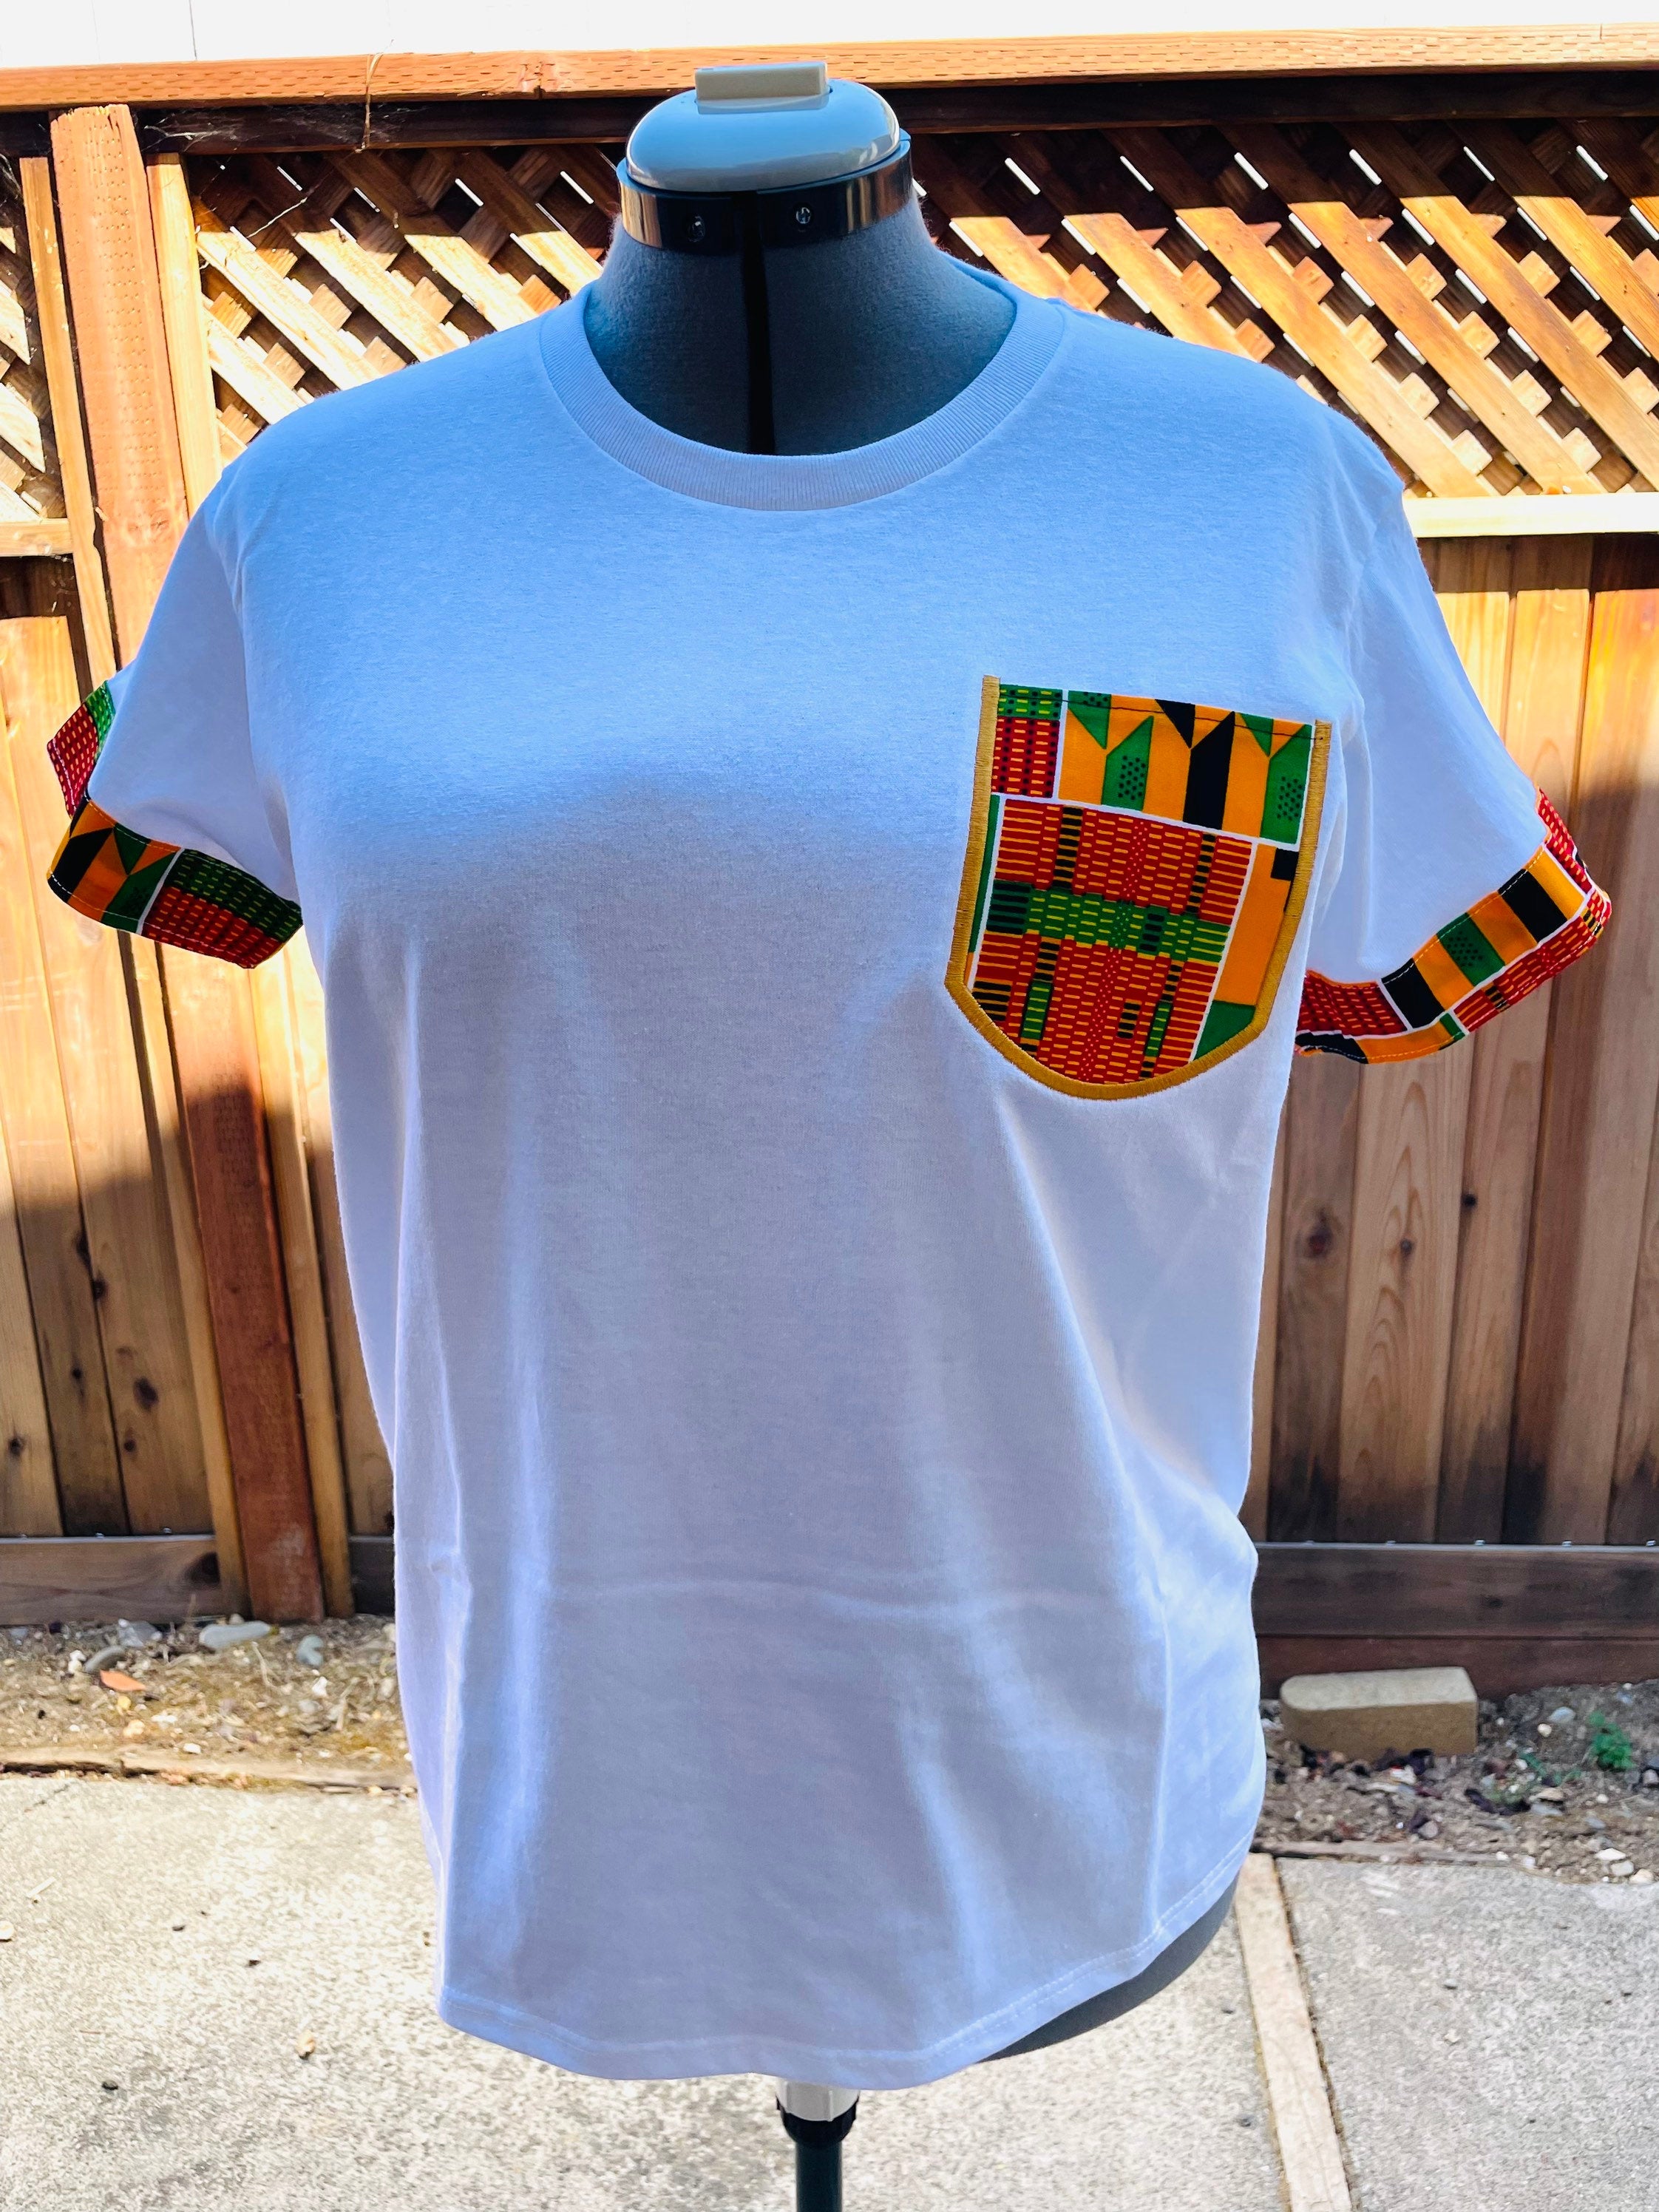 Adult unisex t-shirt with African print fabric on sleeves and pocket